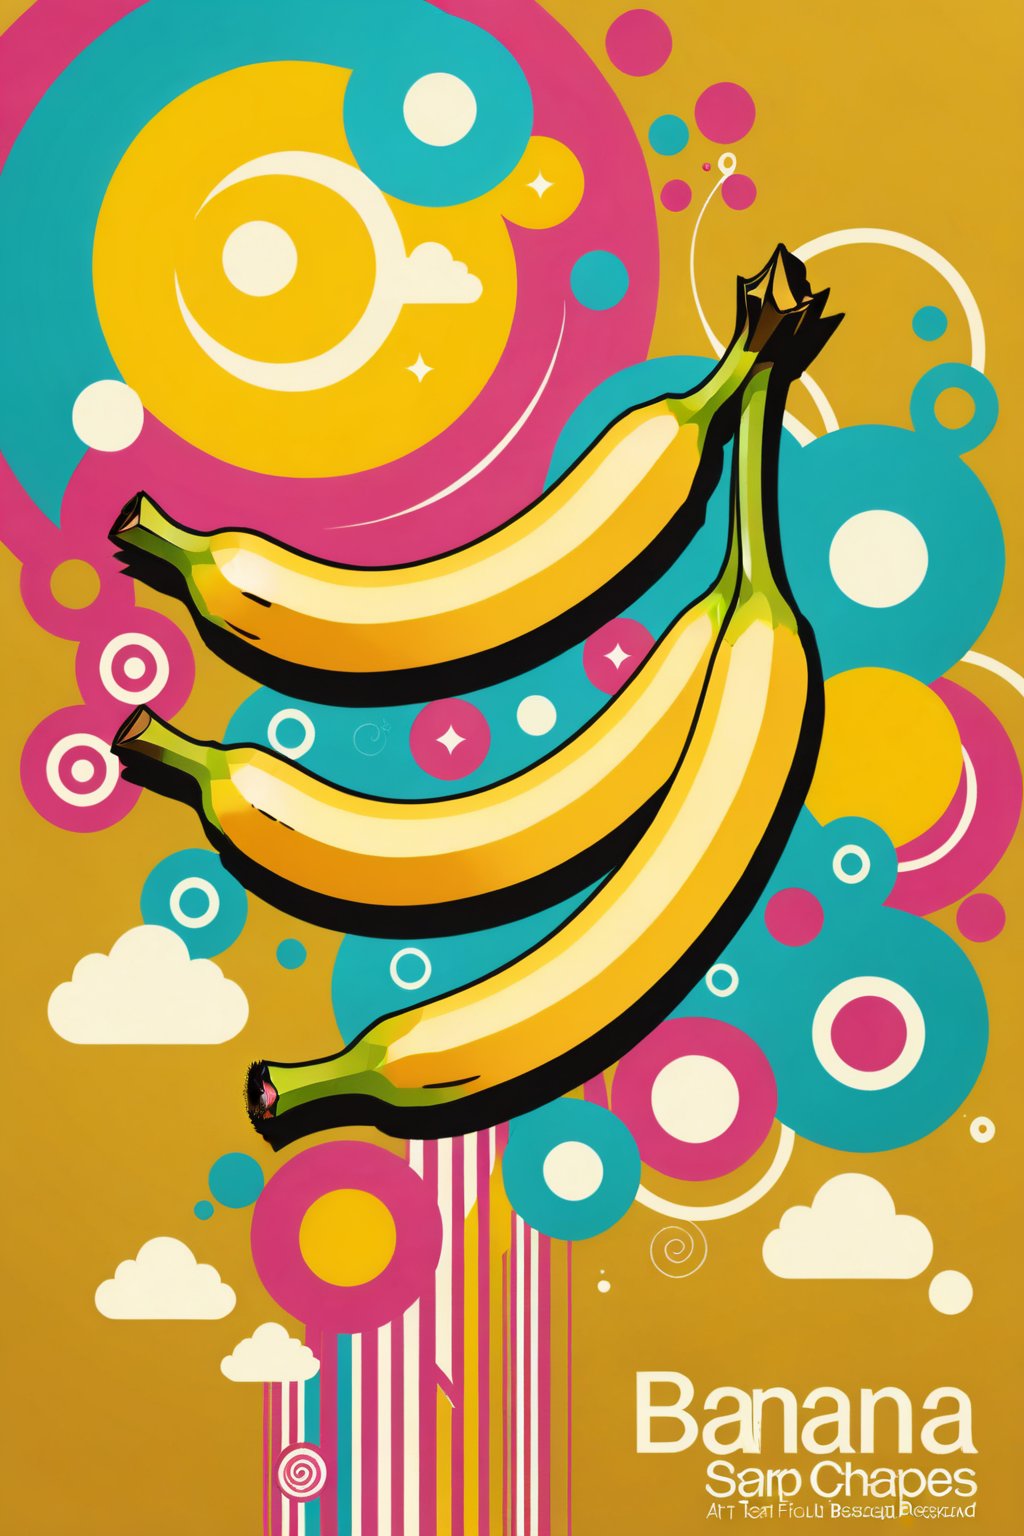 (An amazing and captivating abstract illustration:1.4), banana, food focus, food, no humans, (grunge style:1.1), (frutiger style:1.3), (colorful:1.3), (2004 aesthetics:1.2). BREAK (beautiful vector shapes:1.3), clouds, circles, (no text:1.4), swirls, arrow \(symbol\), (gradient background:1.3). BREAK highest quality, sharp details, oversaturated, detailed and intricate, yellow theme, original artwork, trendy, vintage, award-winning, artint, SFW